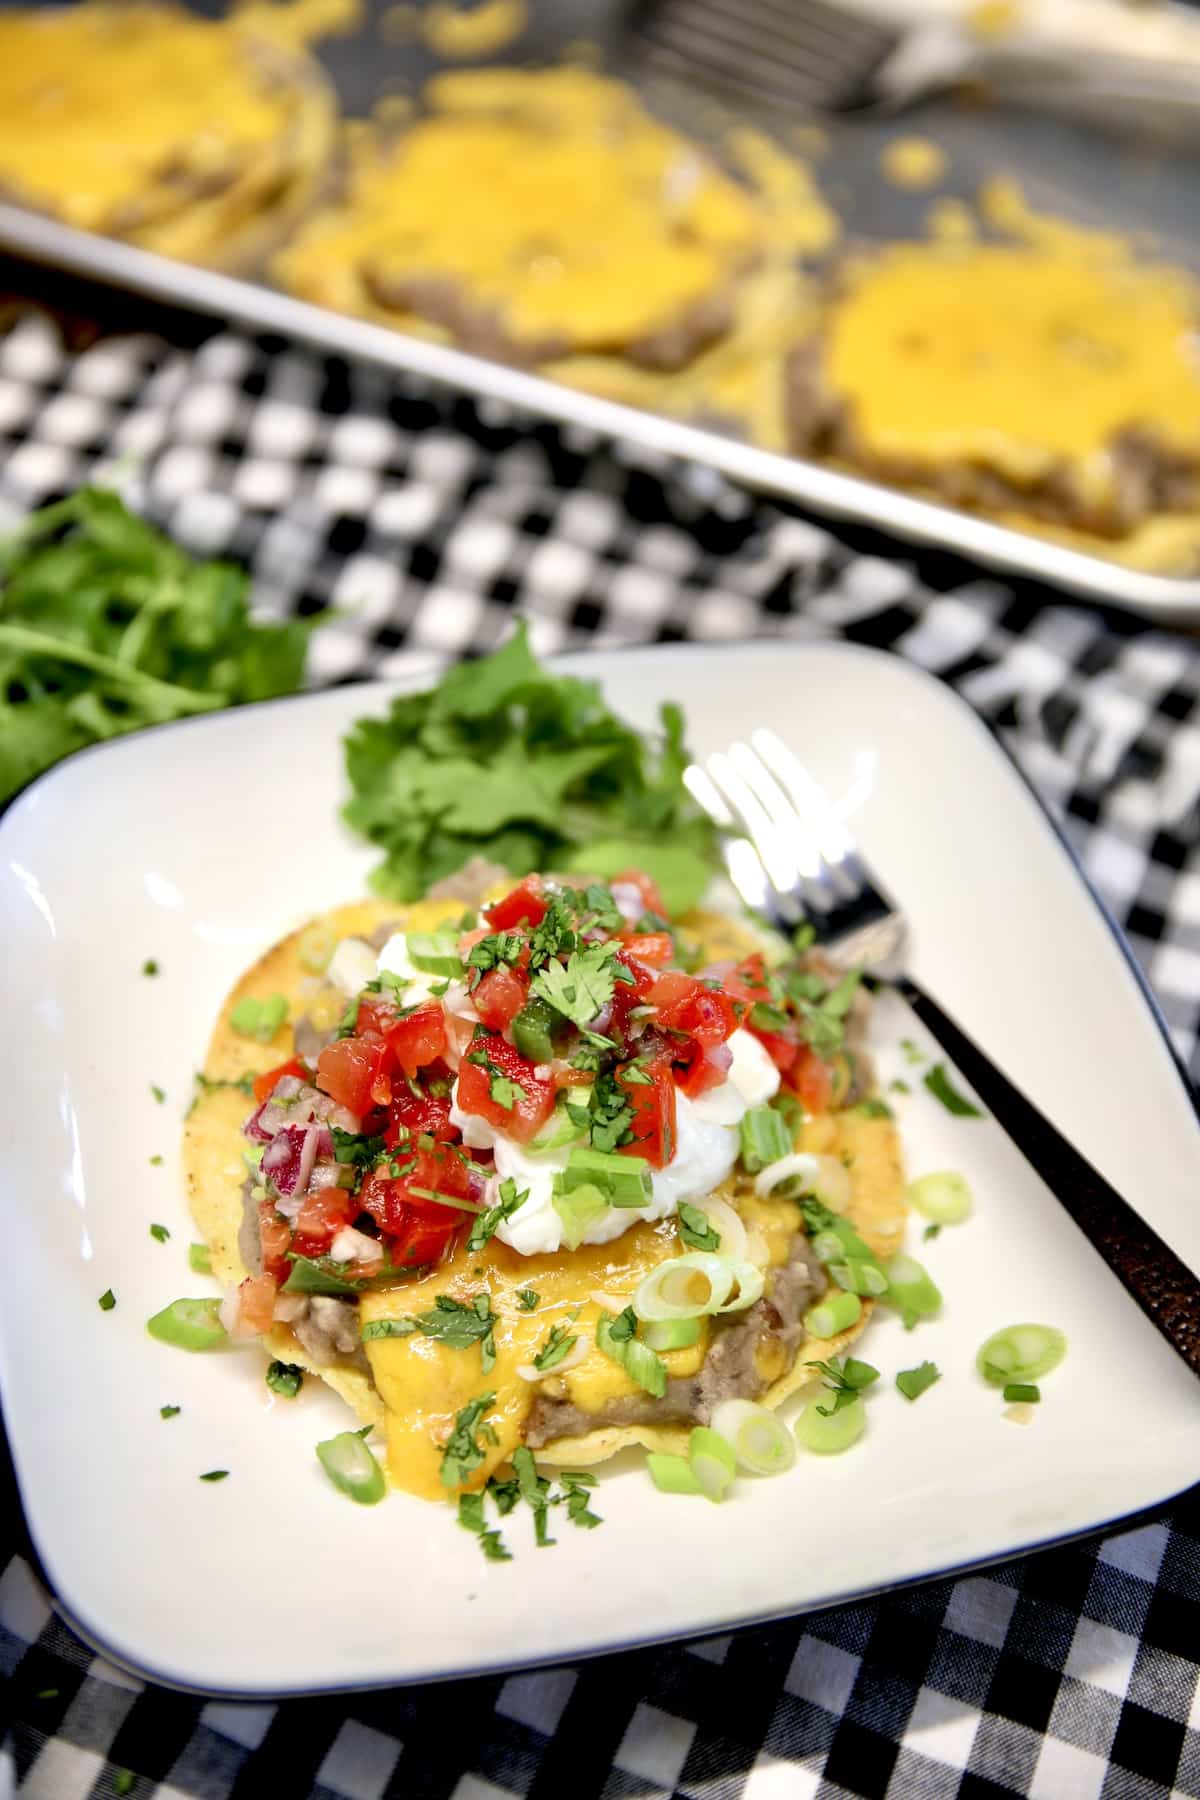 Plate with bean tostada topped with cheese, sour cream, salsa.